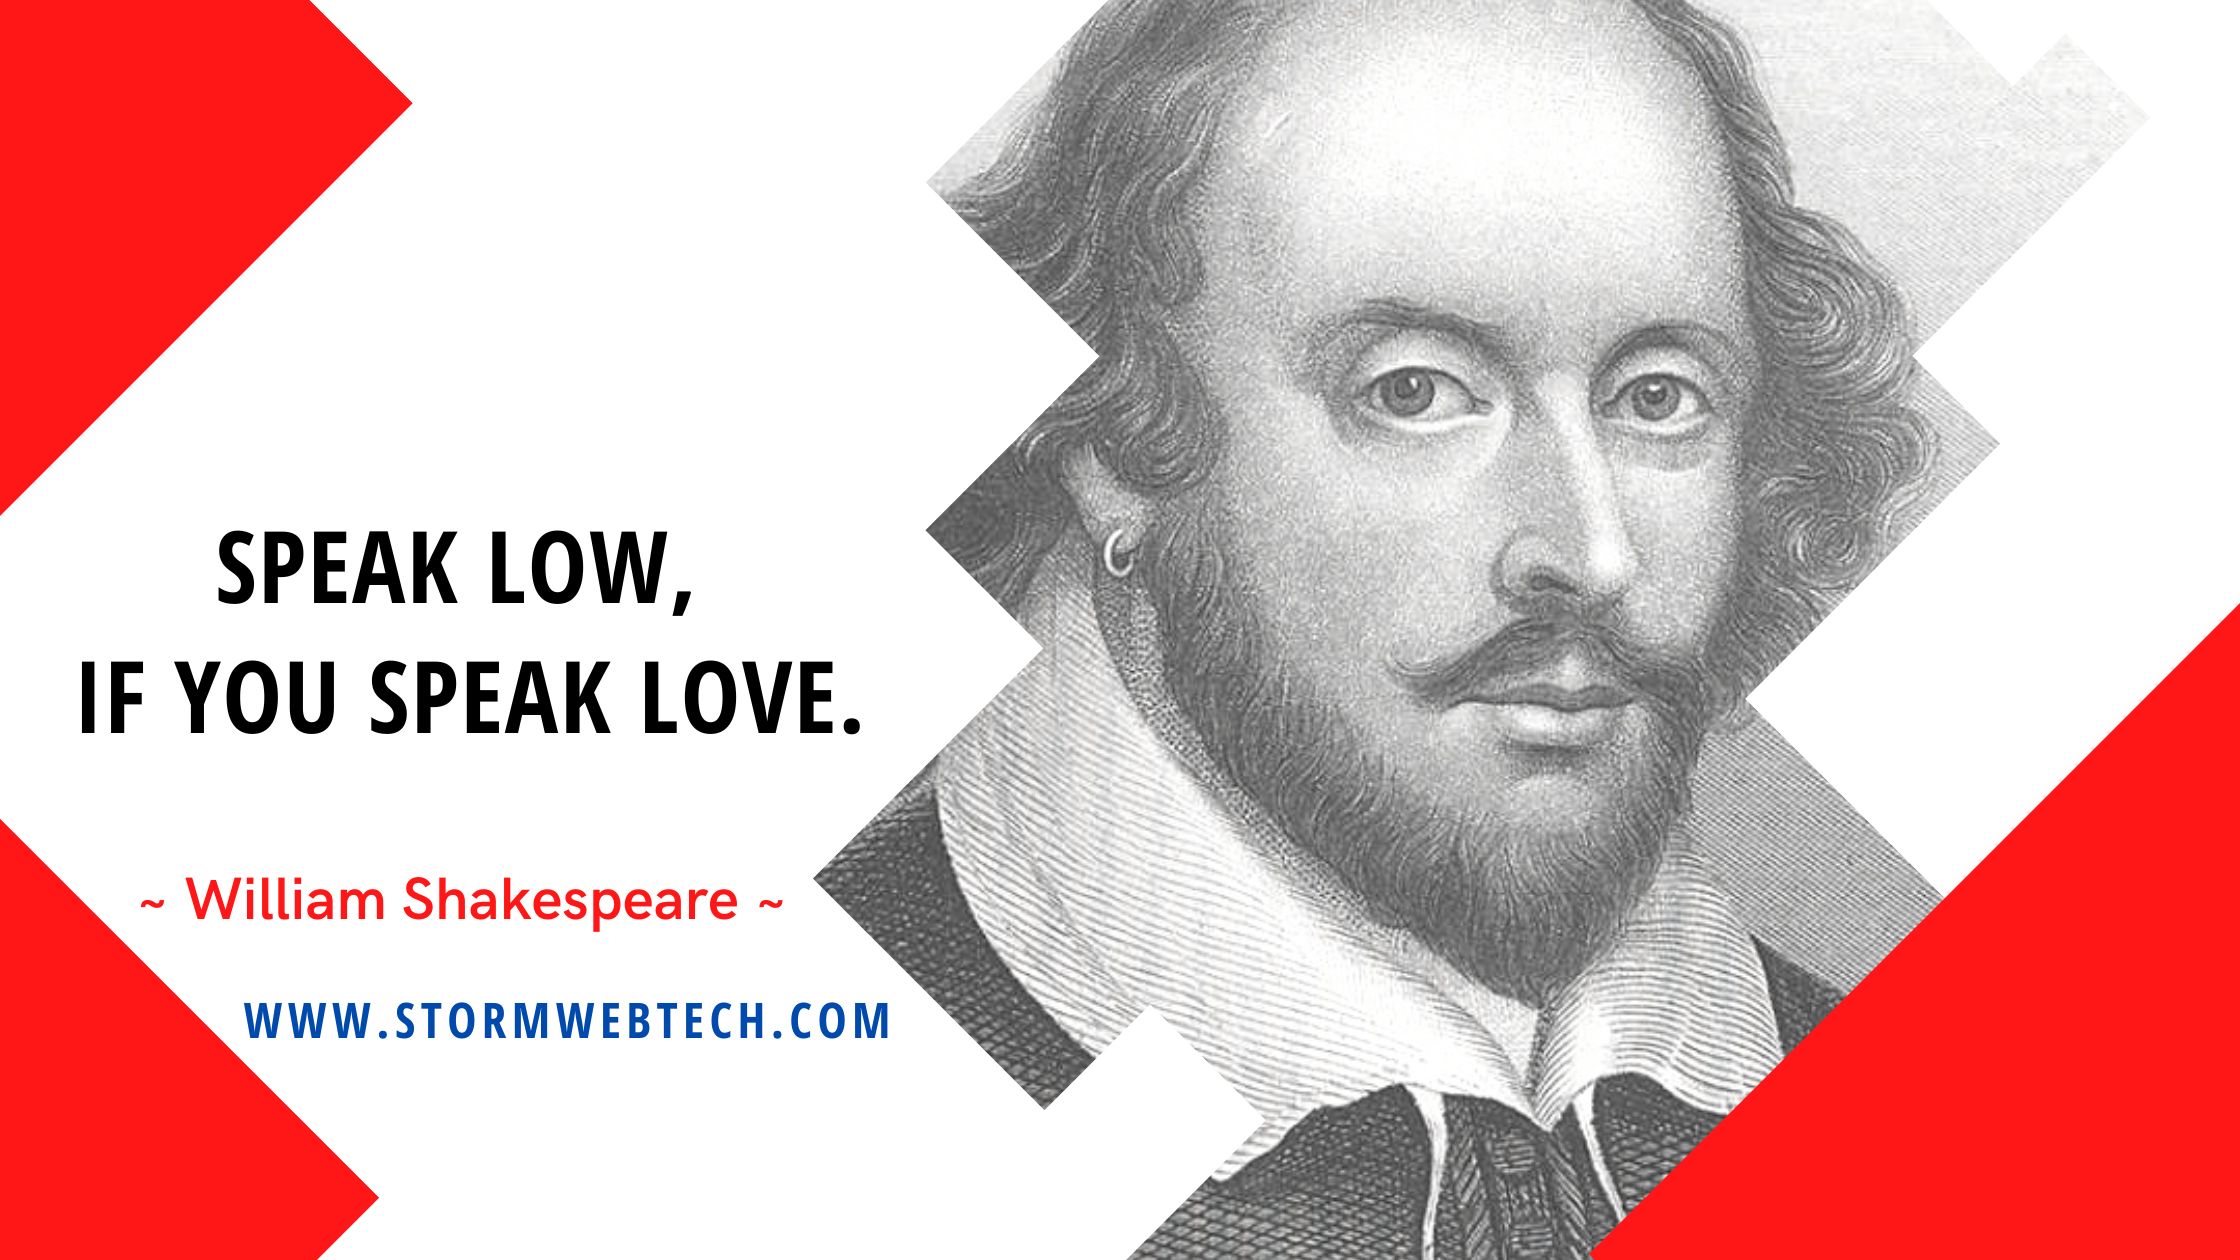 famous william shakespeare quotes, quotes of william shakespeare, famous quotes by william shakespeare, william shakespeare thoughts